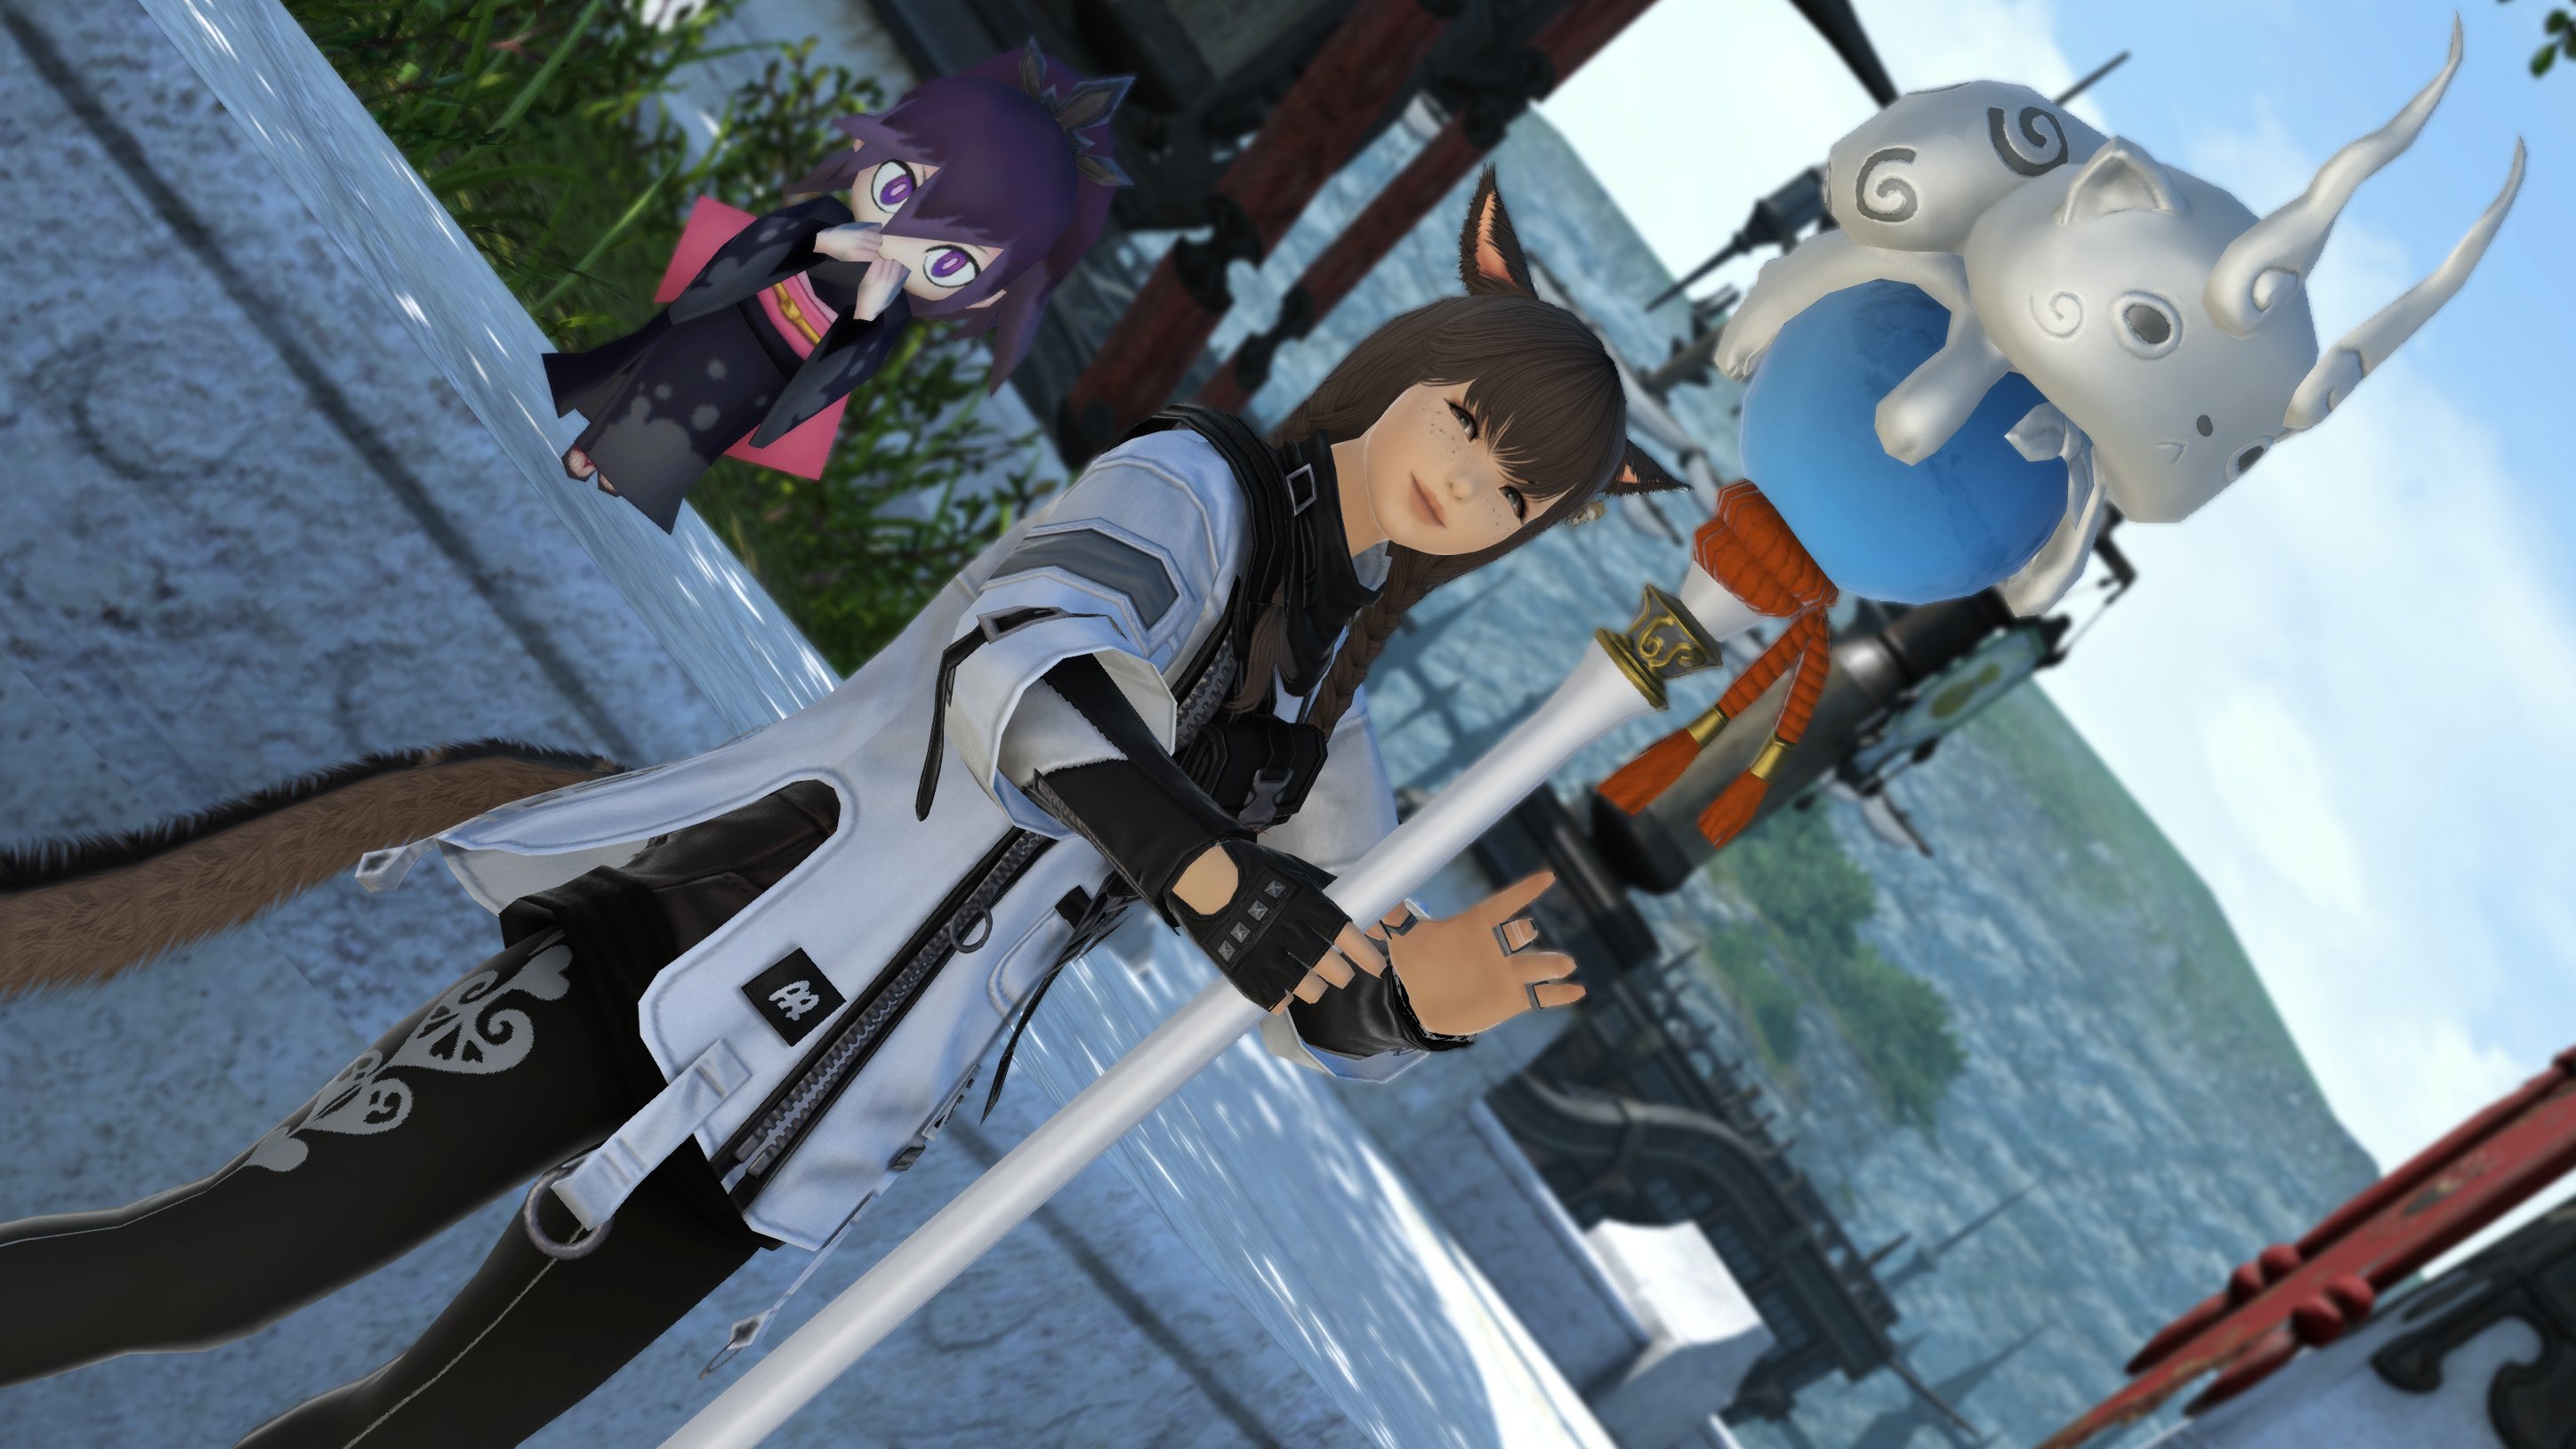 How to get every Final Fantasy XIV x Yo-kai Watch collaboration mount, minion and weapon